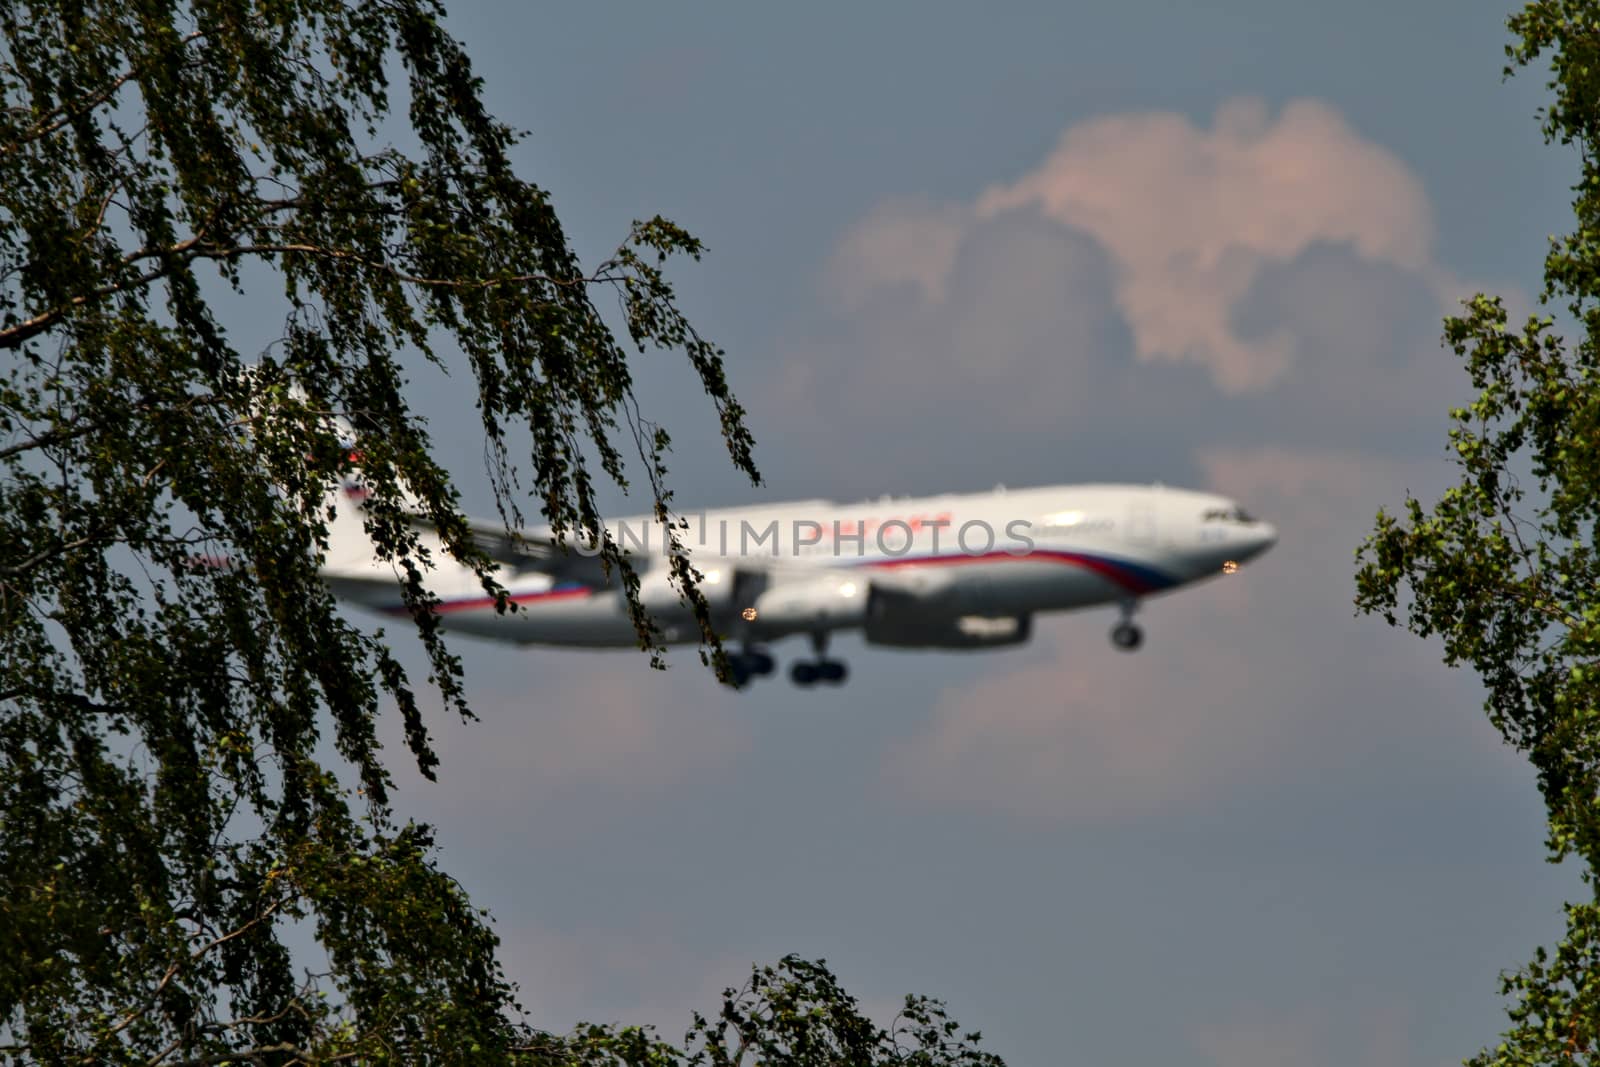 A white airplane with red stripes preparing to land. Photo taken through the trees, airplane blurred on background.